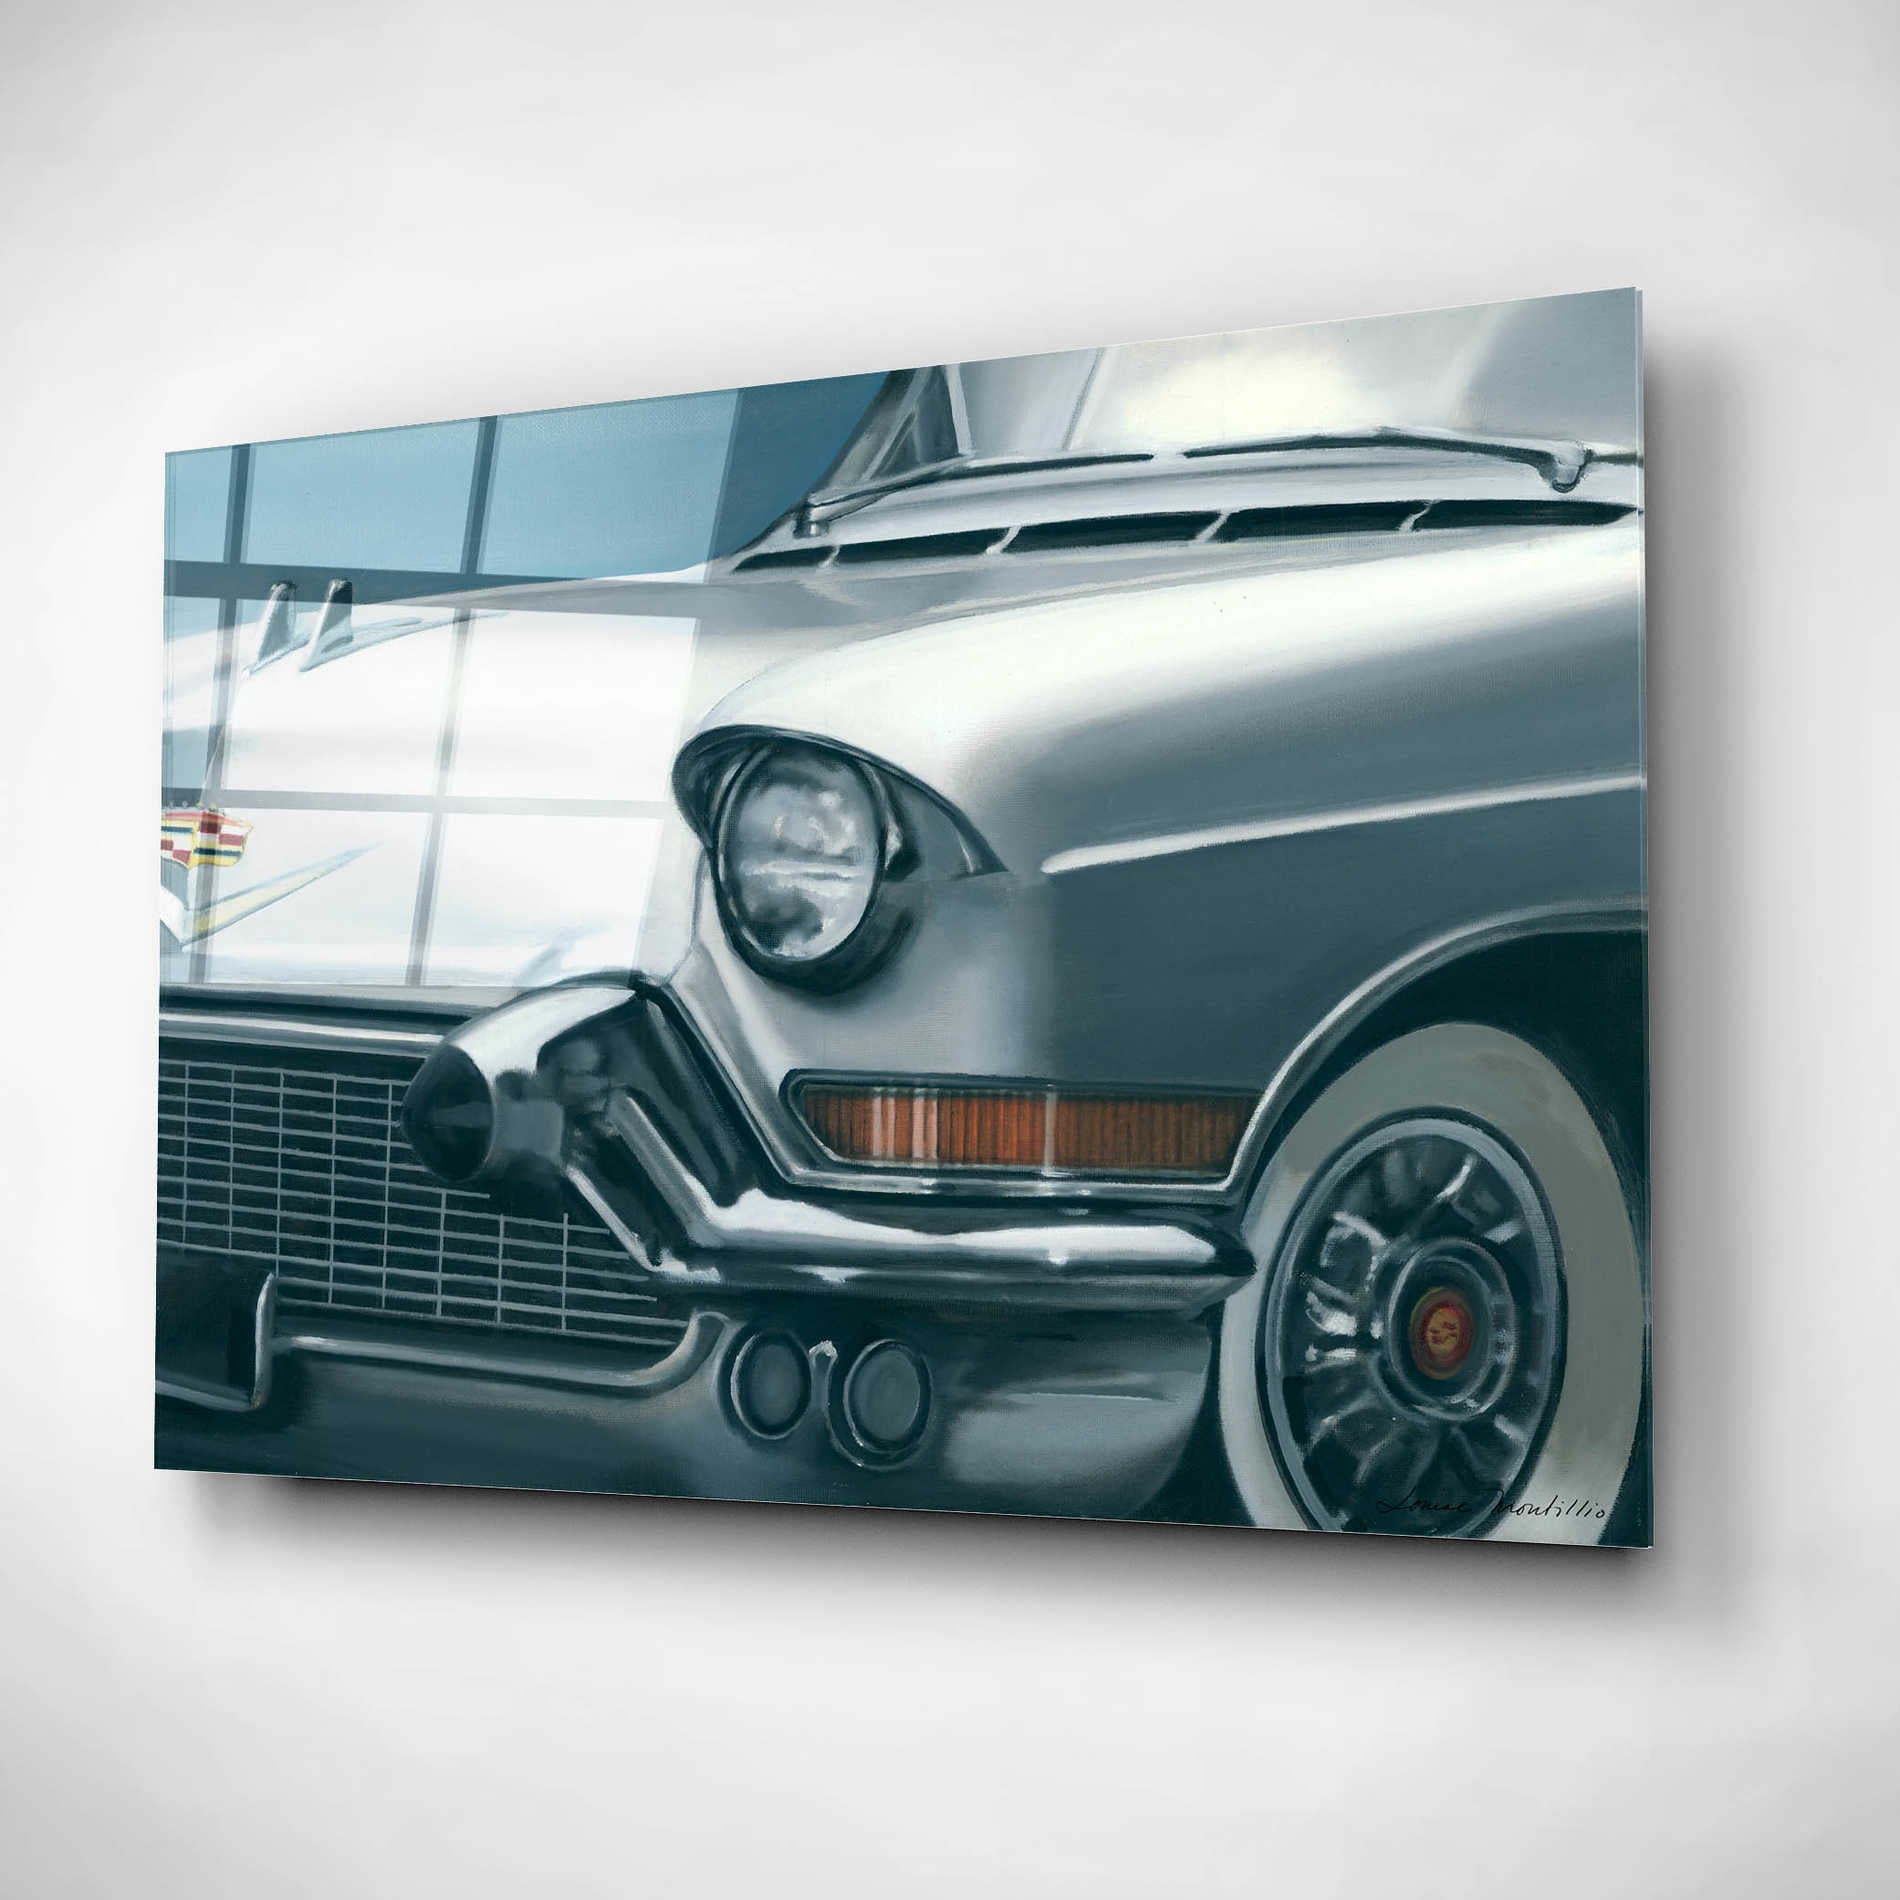 Epic Art 'Vintage Silver Caddy' by Louise Montillio, Acrylic Glass Wall Art,24x16